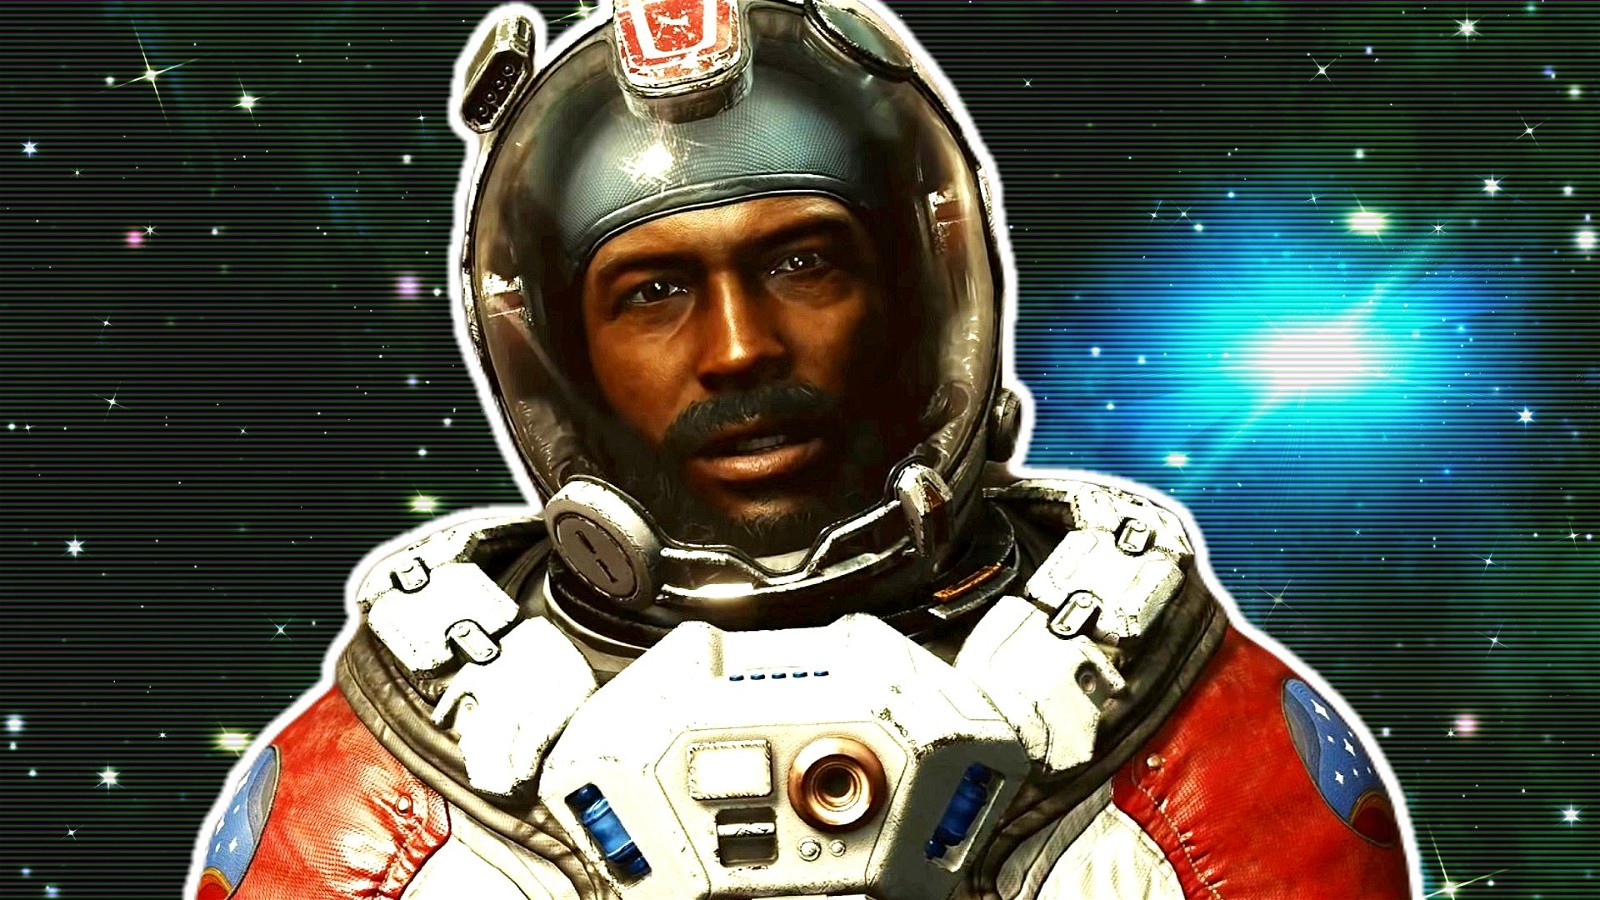 It is actually quite easy to get the Mark 1 spacesuit in Starfield.